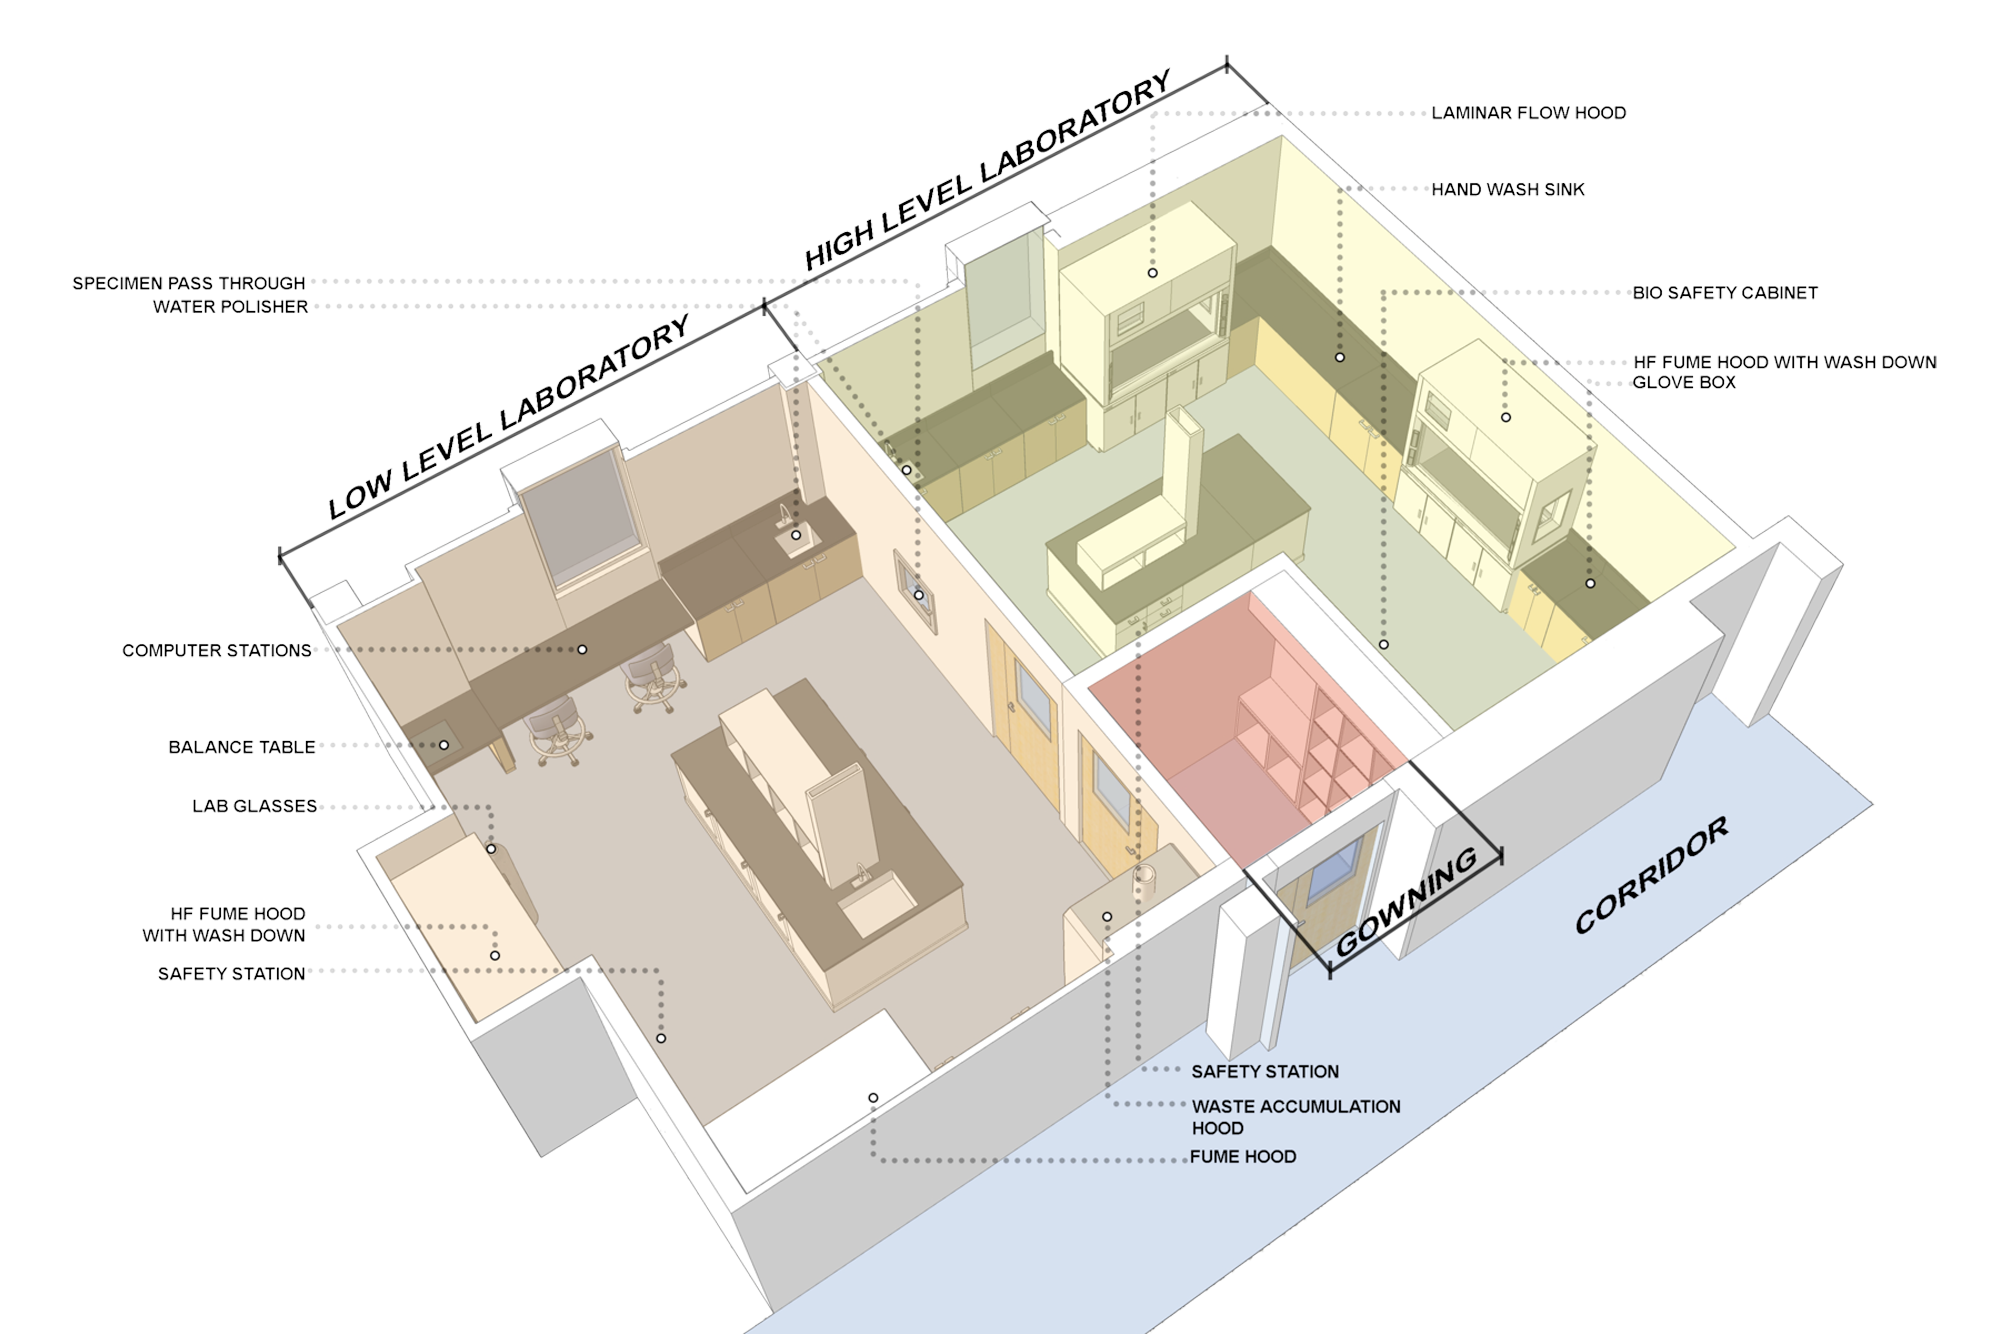 Floor plan, interior, bird's eye view of Morrill Trace Metals Research Laboratory at UMass Amherst